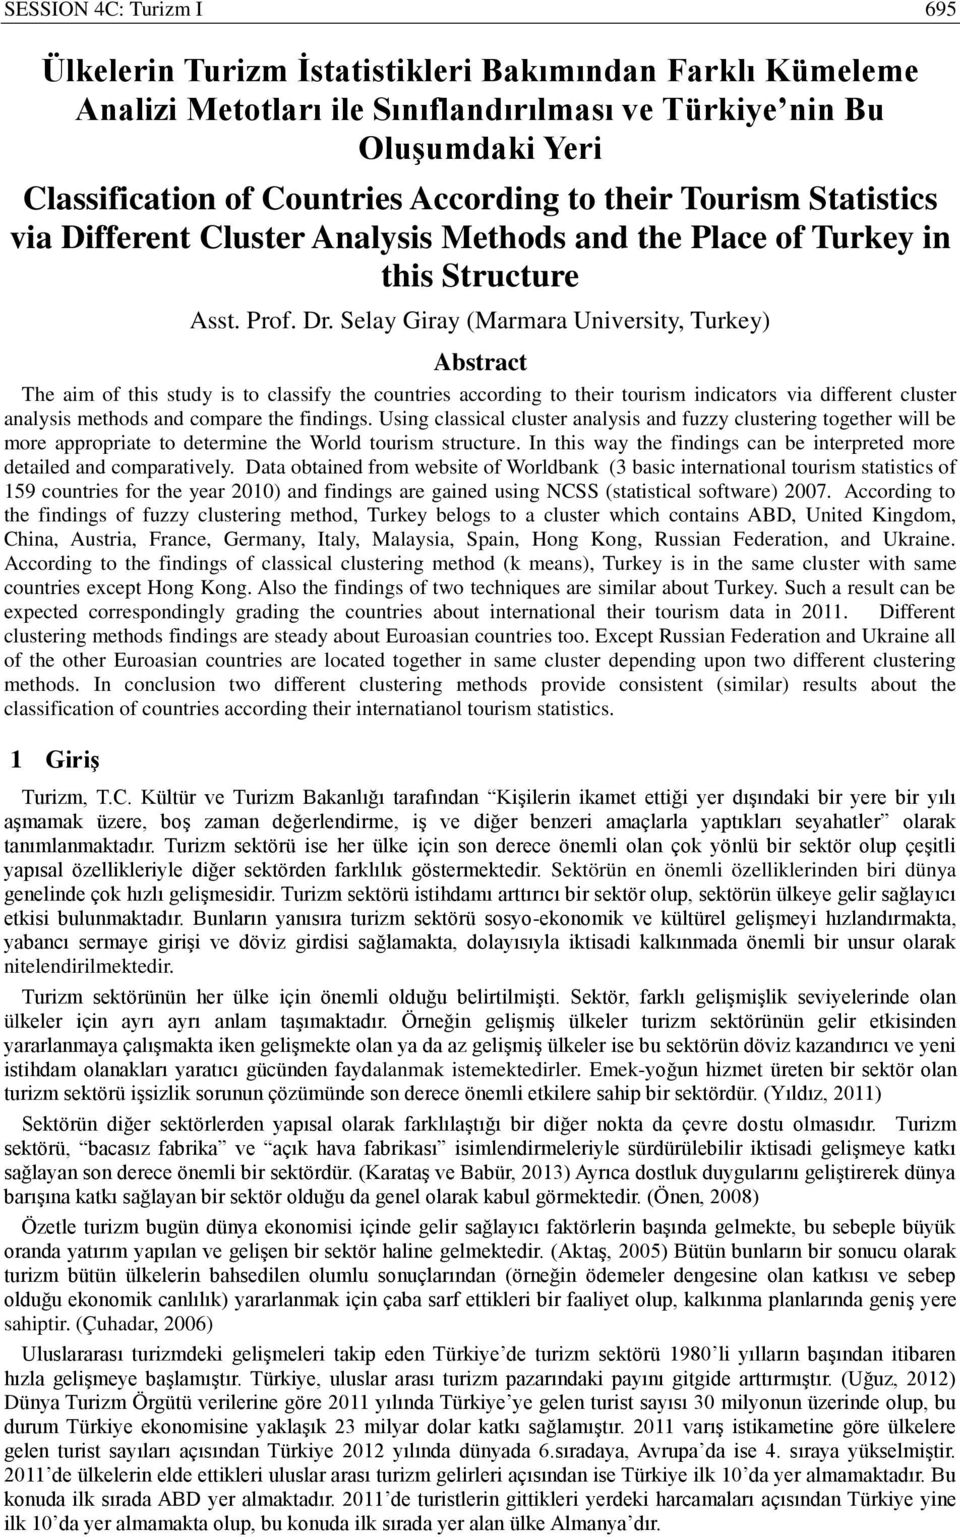 Selay Giray (Marmara University, Turkey) Abstract The aim of this study is to classify the countries according to their tourism indicators via different cluster analysis methods and compare the